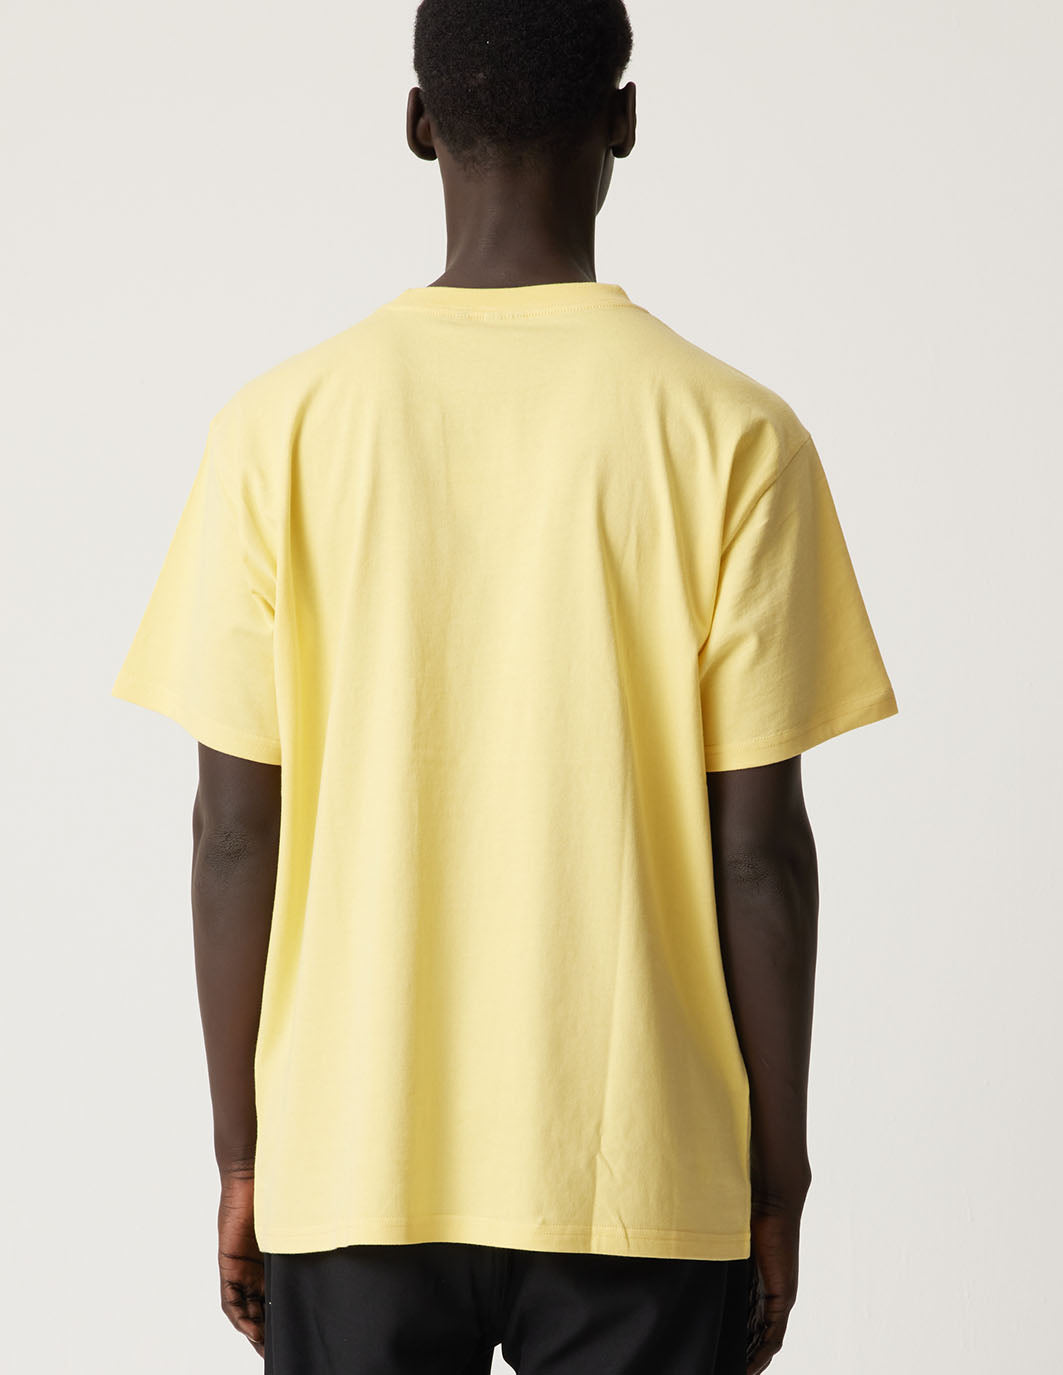 COGNITION T-SHIRT | FLAX